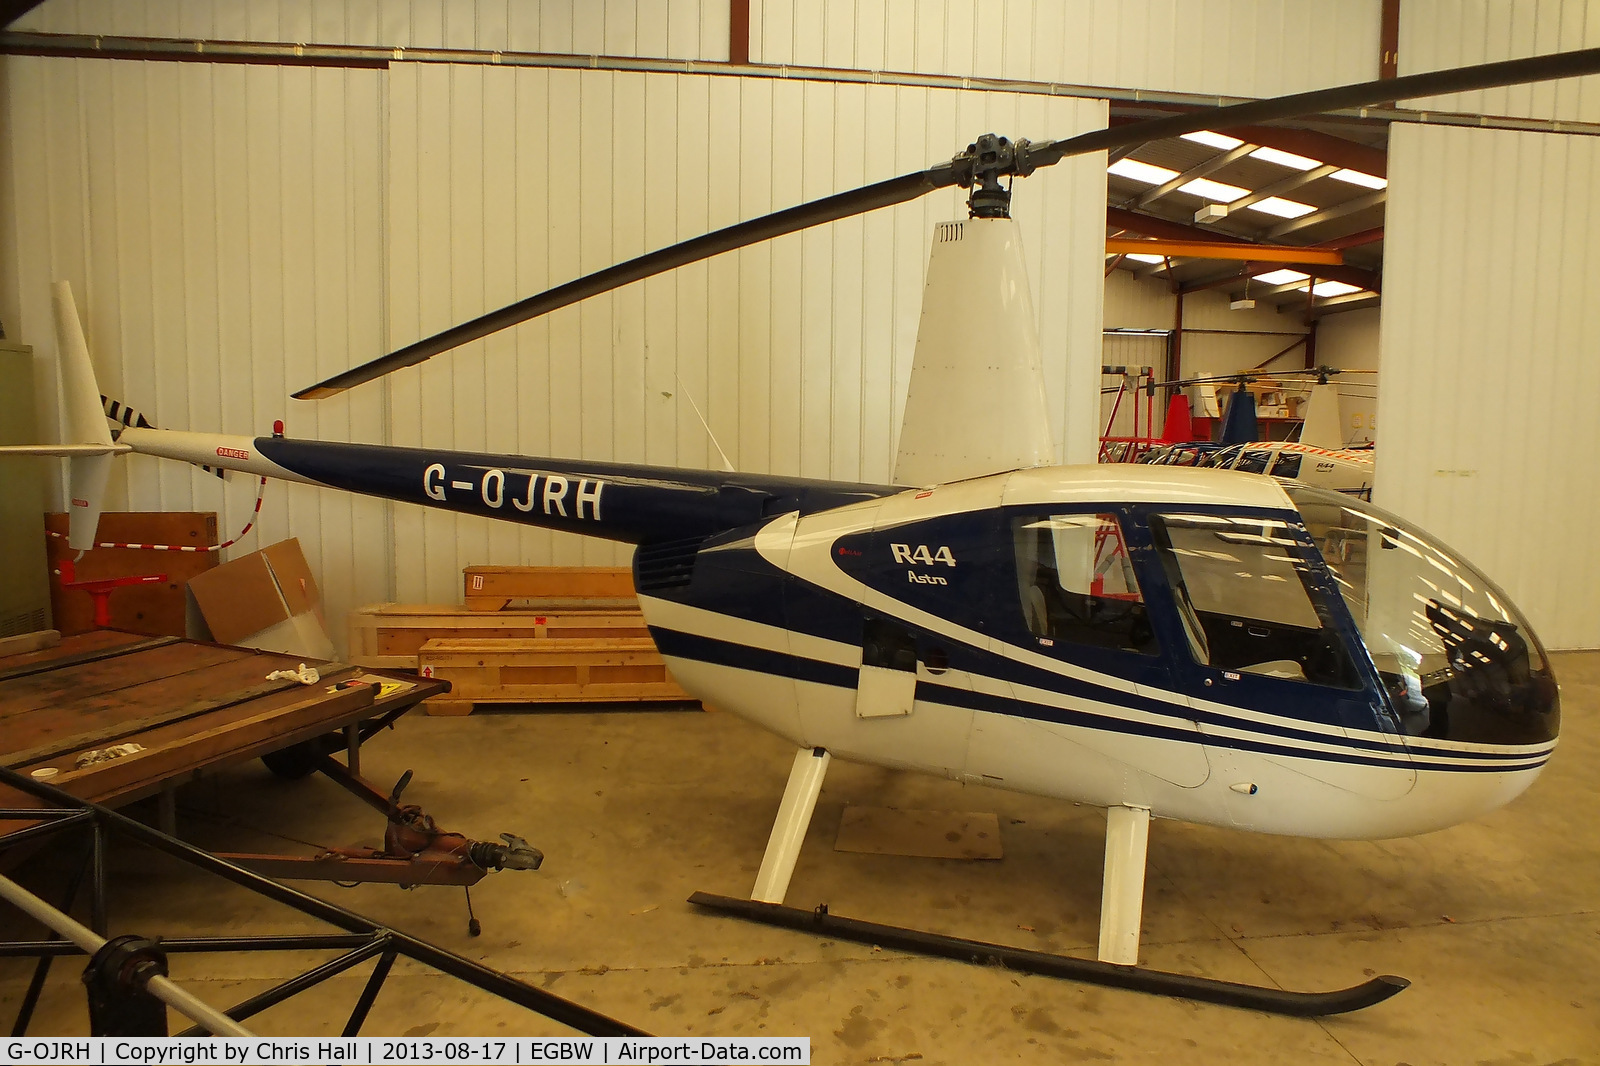 G-OJRH, 1997 Robinson R44 Astro C/N 0321, privately owned